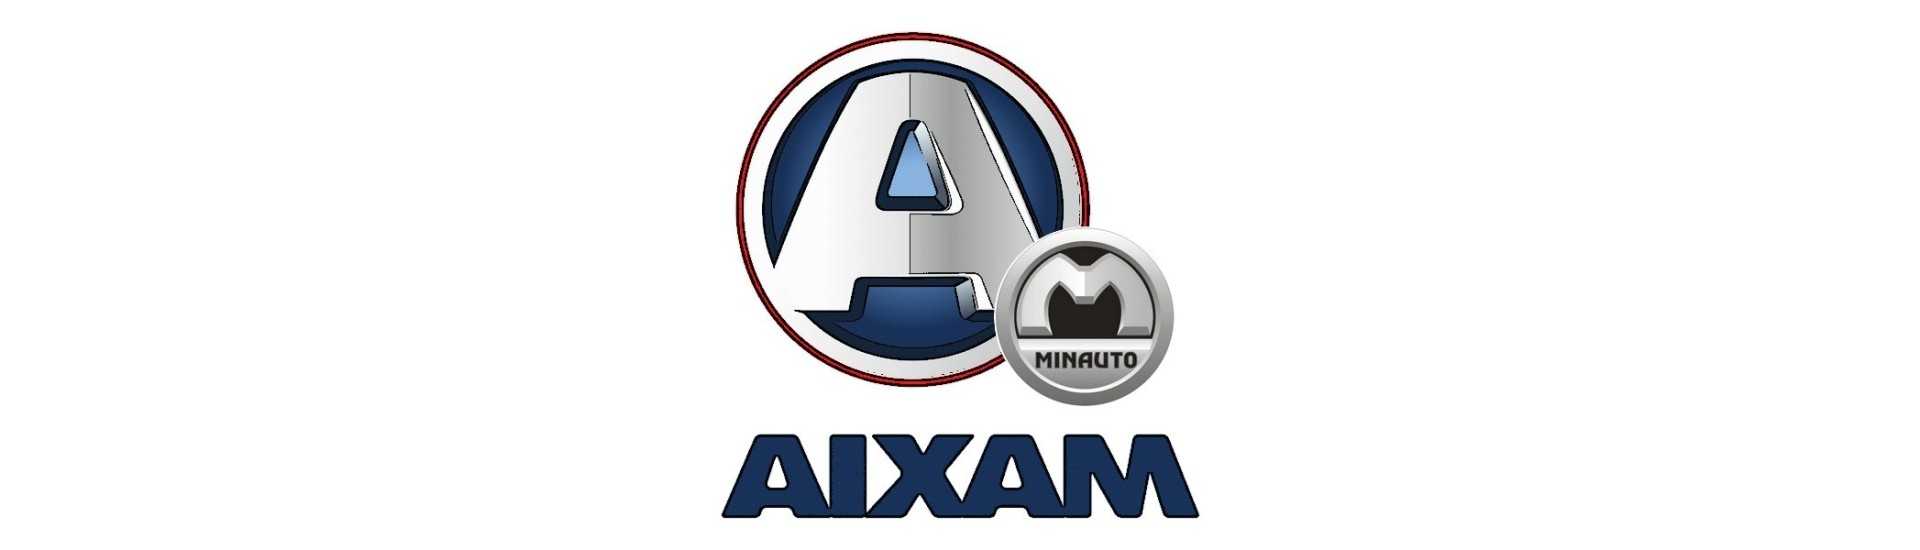 High glass at the best price for car without a permit Aixam Minauto